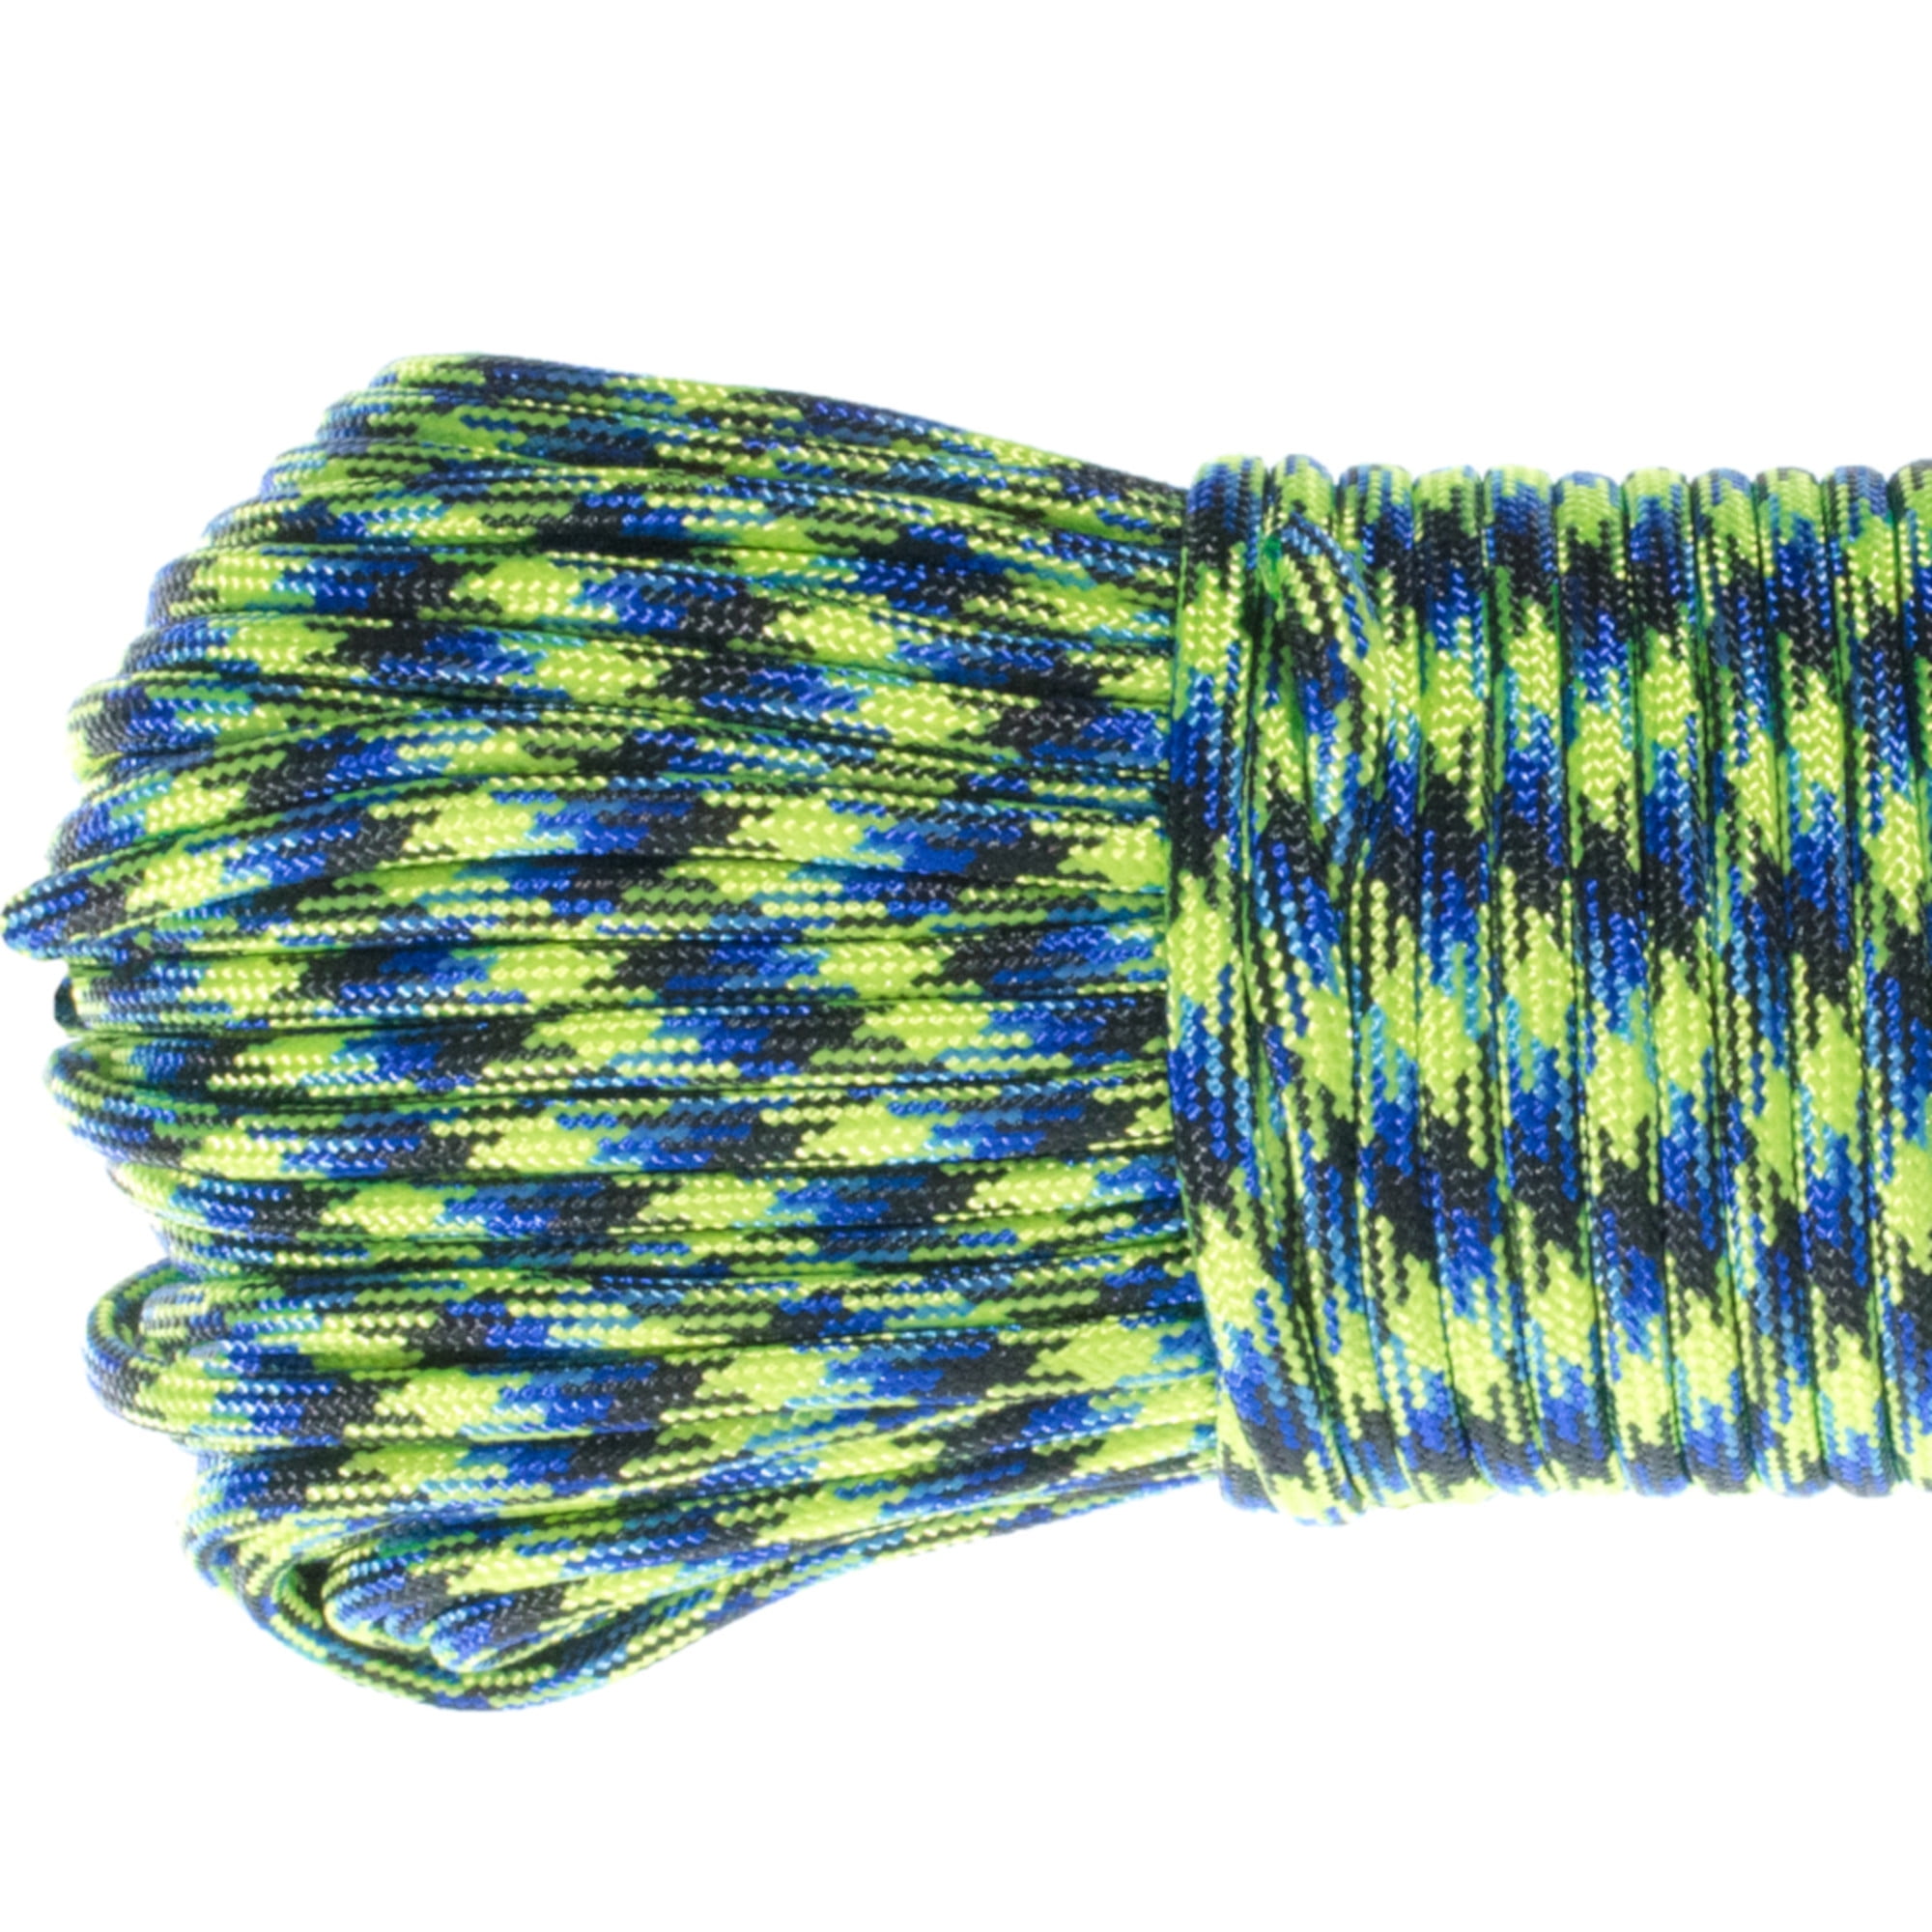 Blue & Black Chequered Paracord 550 7 Strand 4mm Cord Rope 15 100 ft 25 50 